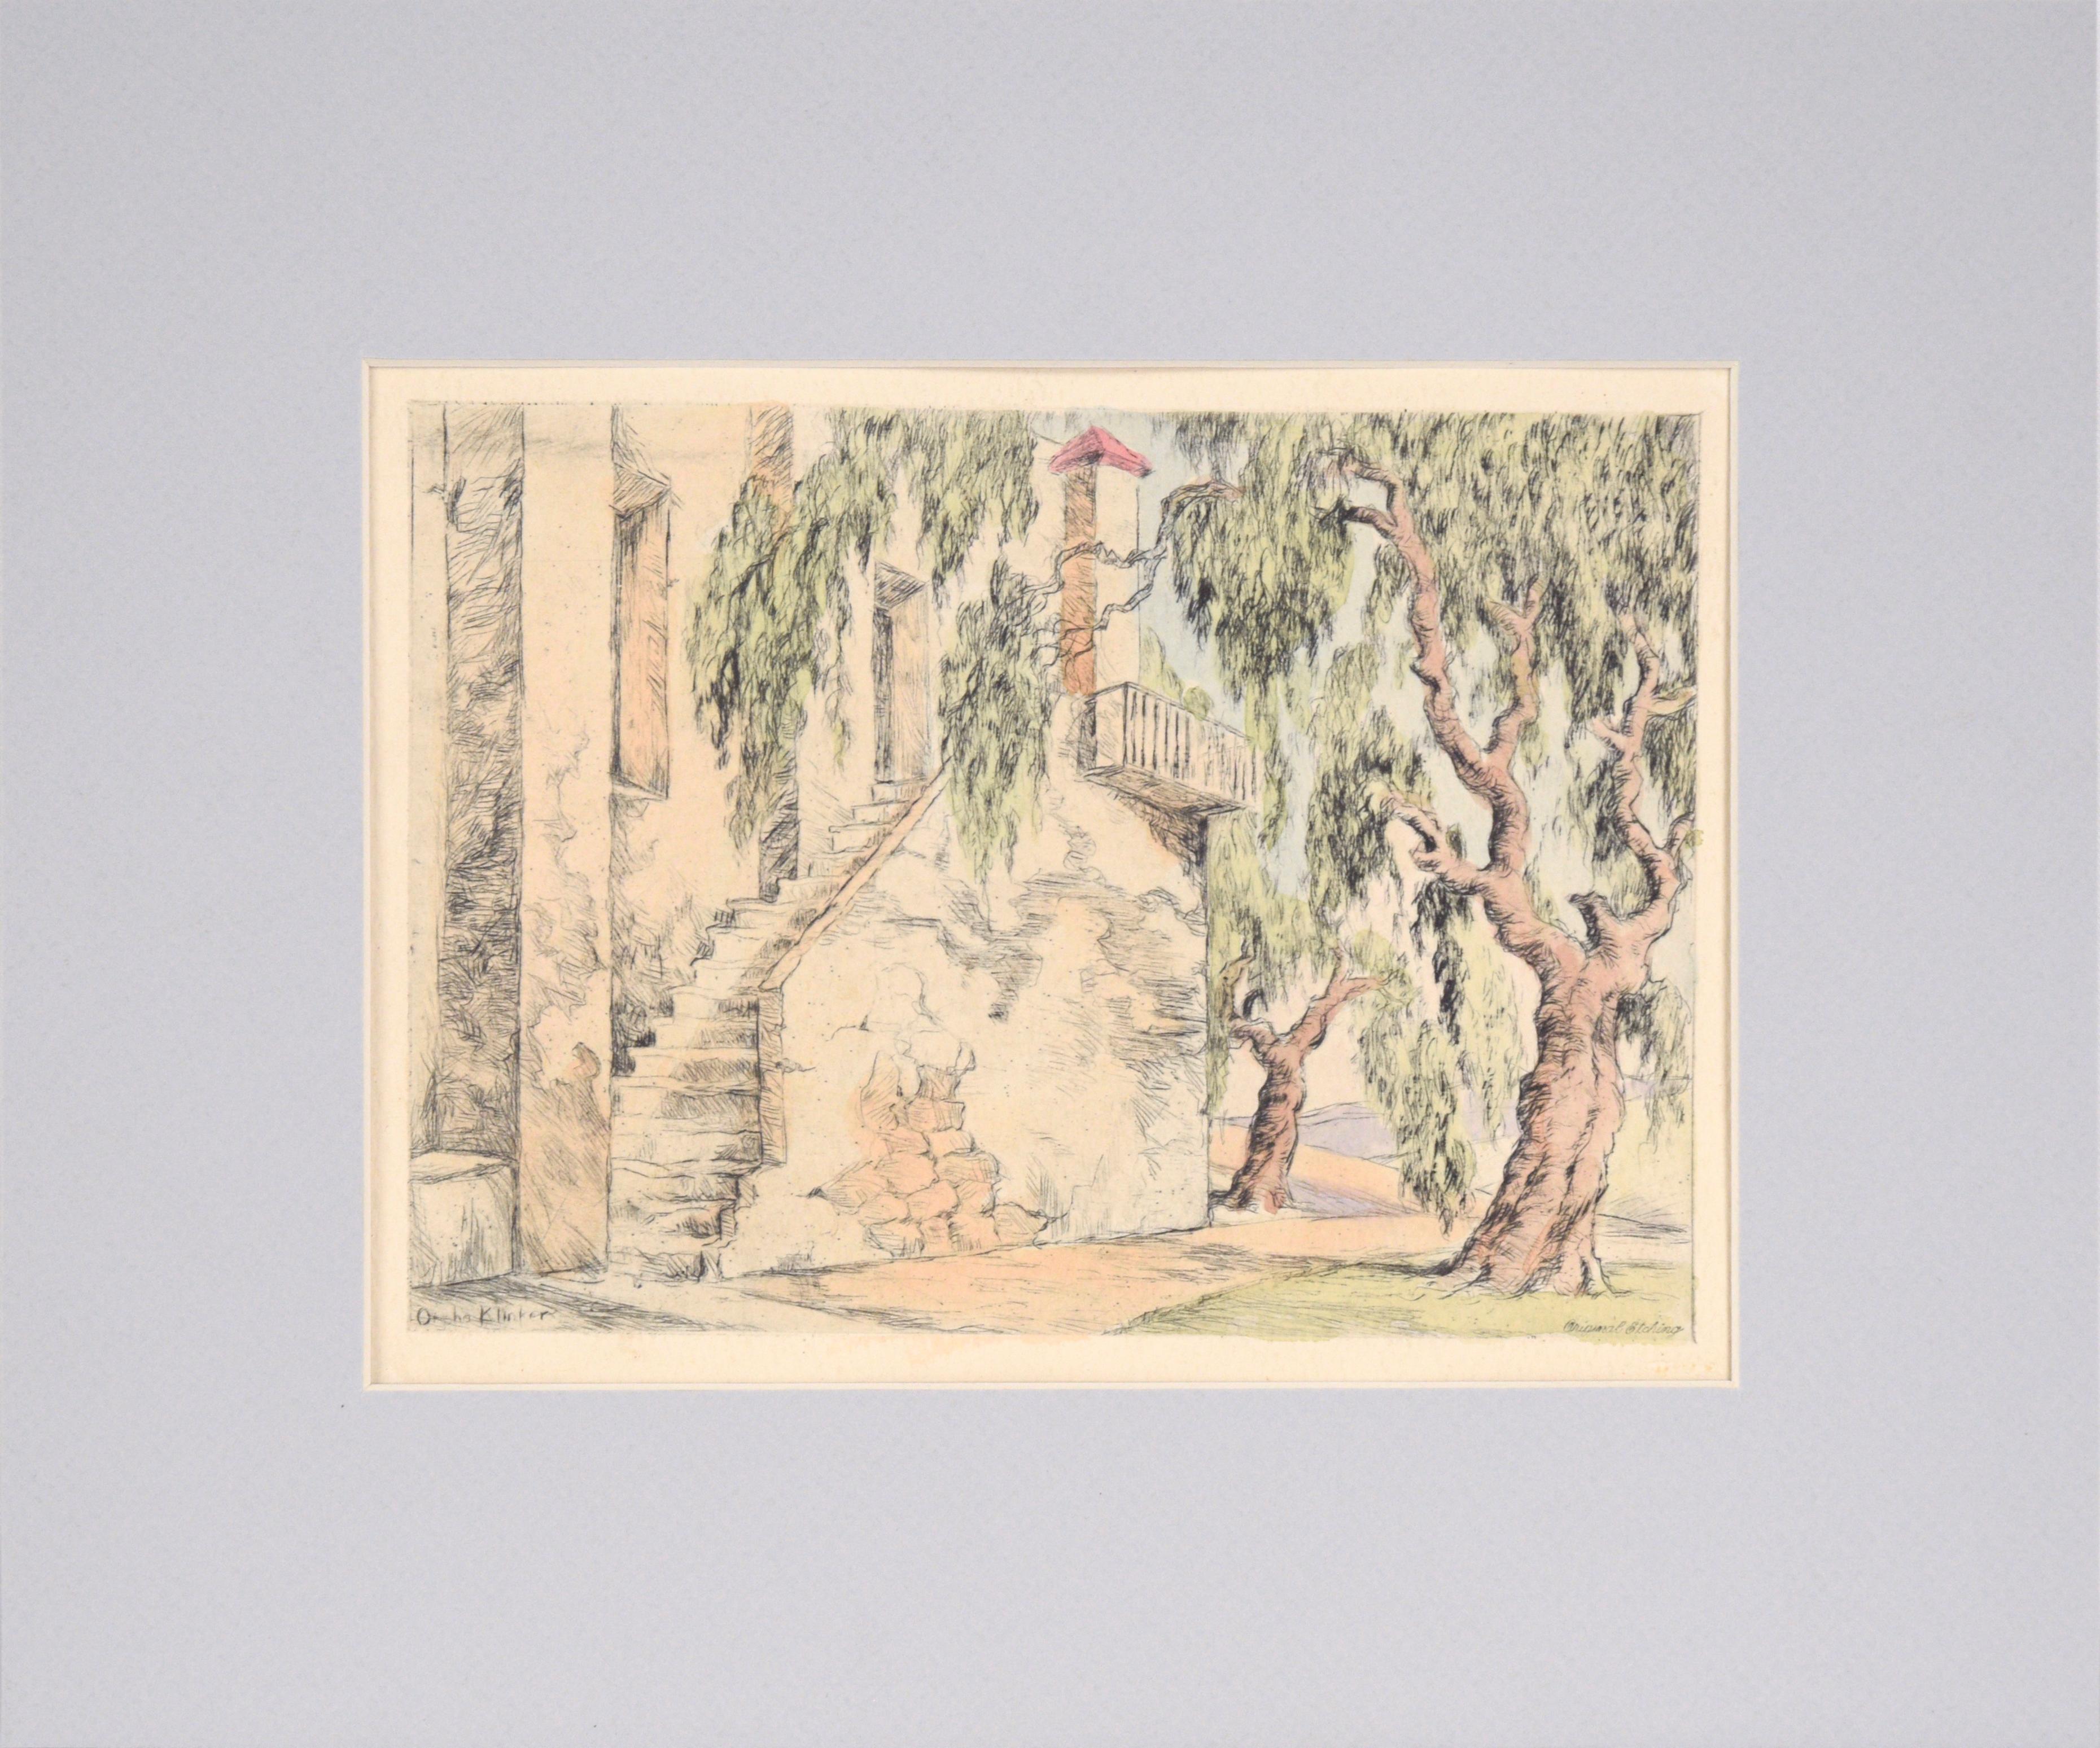 Orpha Klinker Landscape Art - Corkscrew Willows with Stairs - Hand Colored Drypoint Etching California Adobe